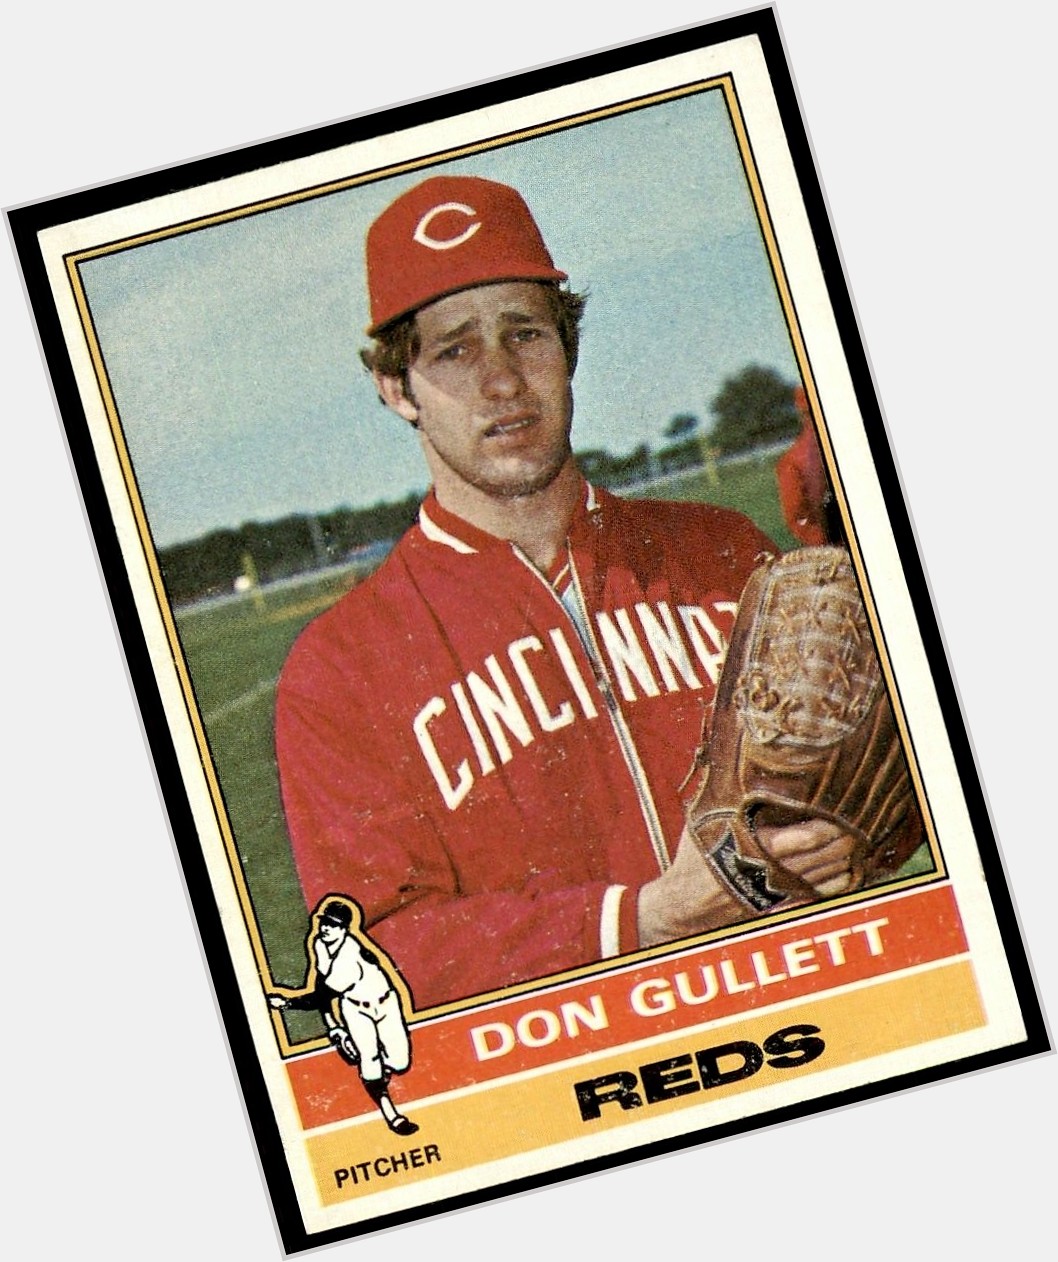 Happy Birthday to two Reds lefties pitching greats!!! Don Gullett (01/06/1951) and Norm Charlton (01/06/1963) 